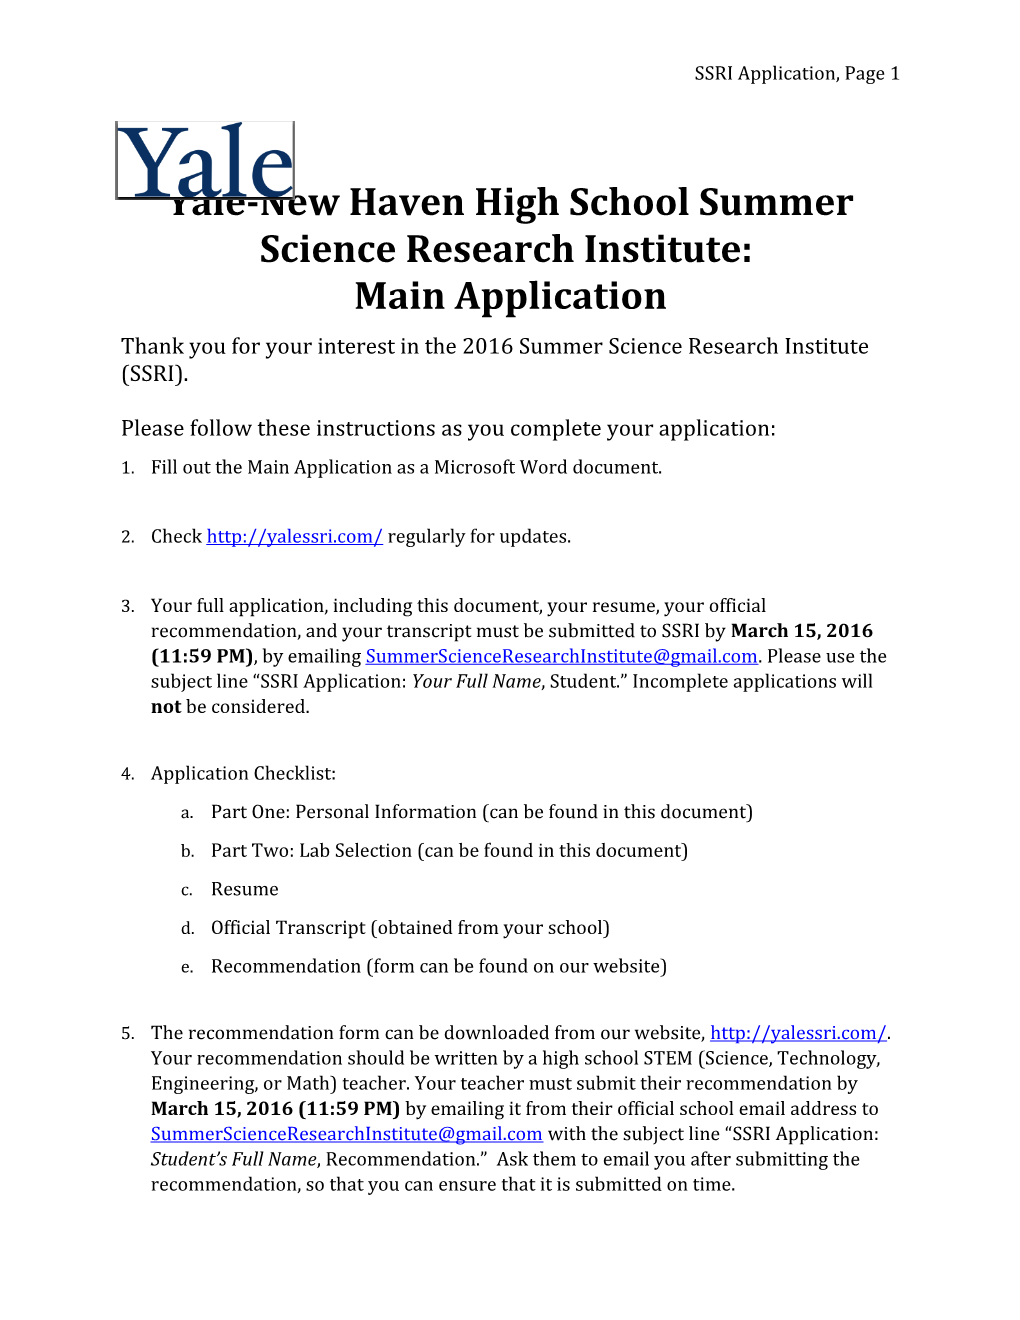 Yale-New Haven High School Summer Science Research Institute